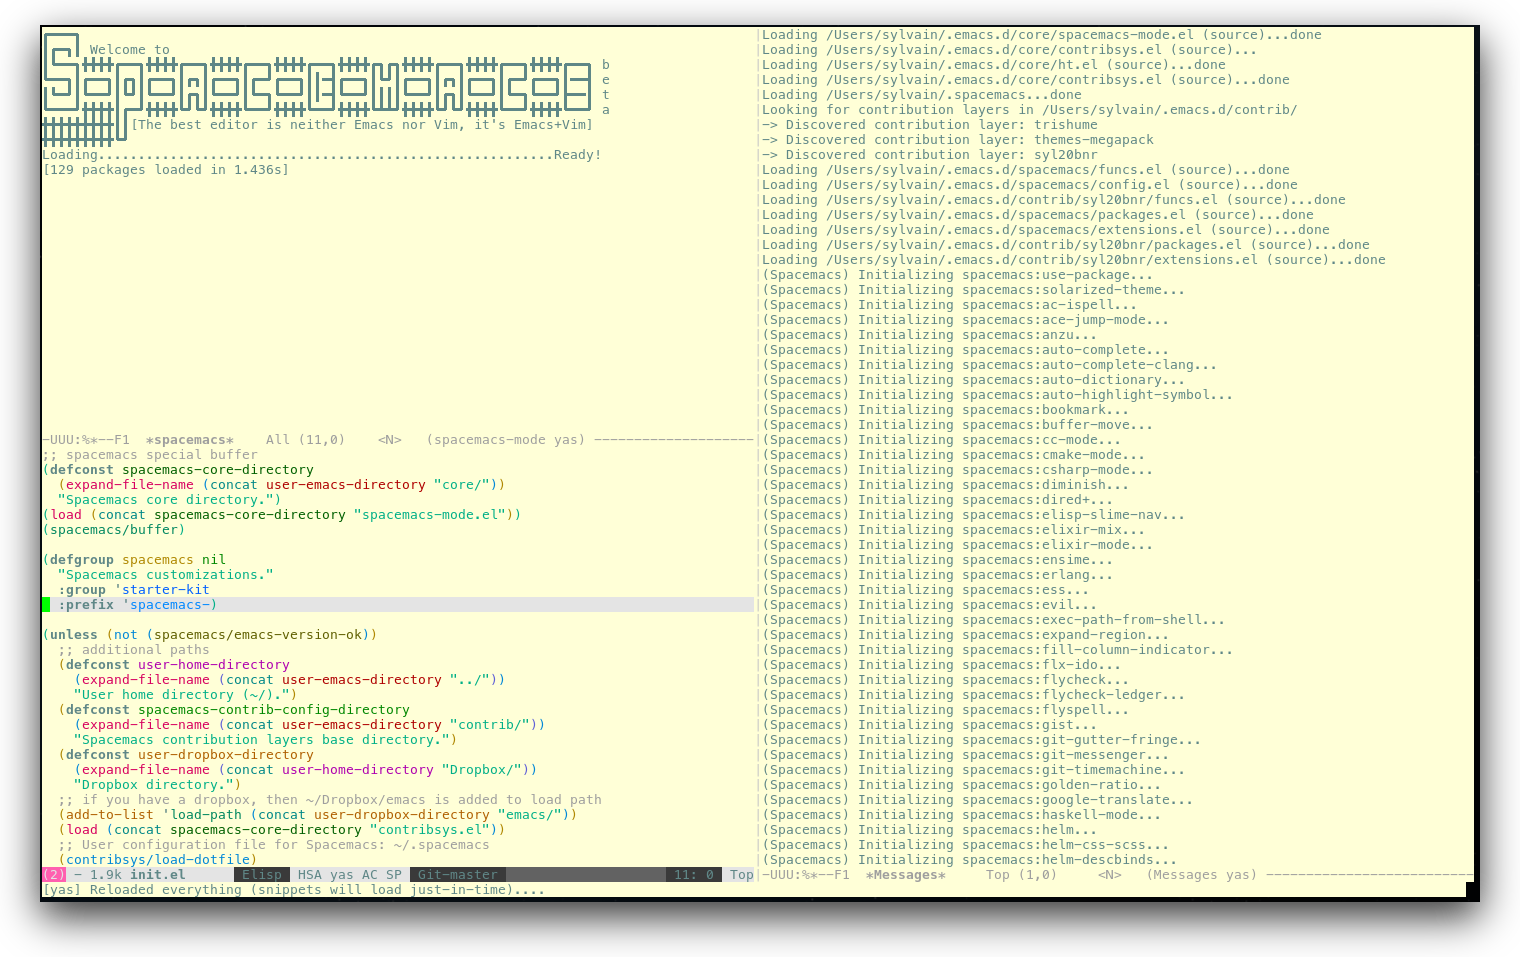 /TakeV/spacemacs/media/commit/ad7d310883fafbbf8e25054d5d8277d282874981/doc/img/spacemacs-urxvt.png